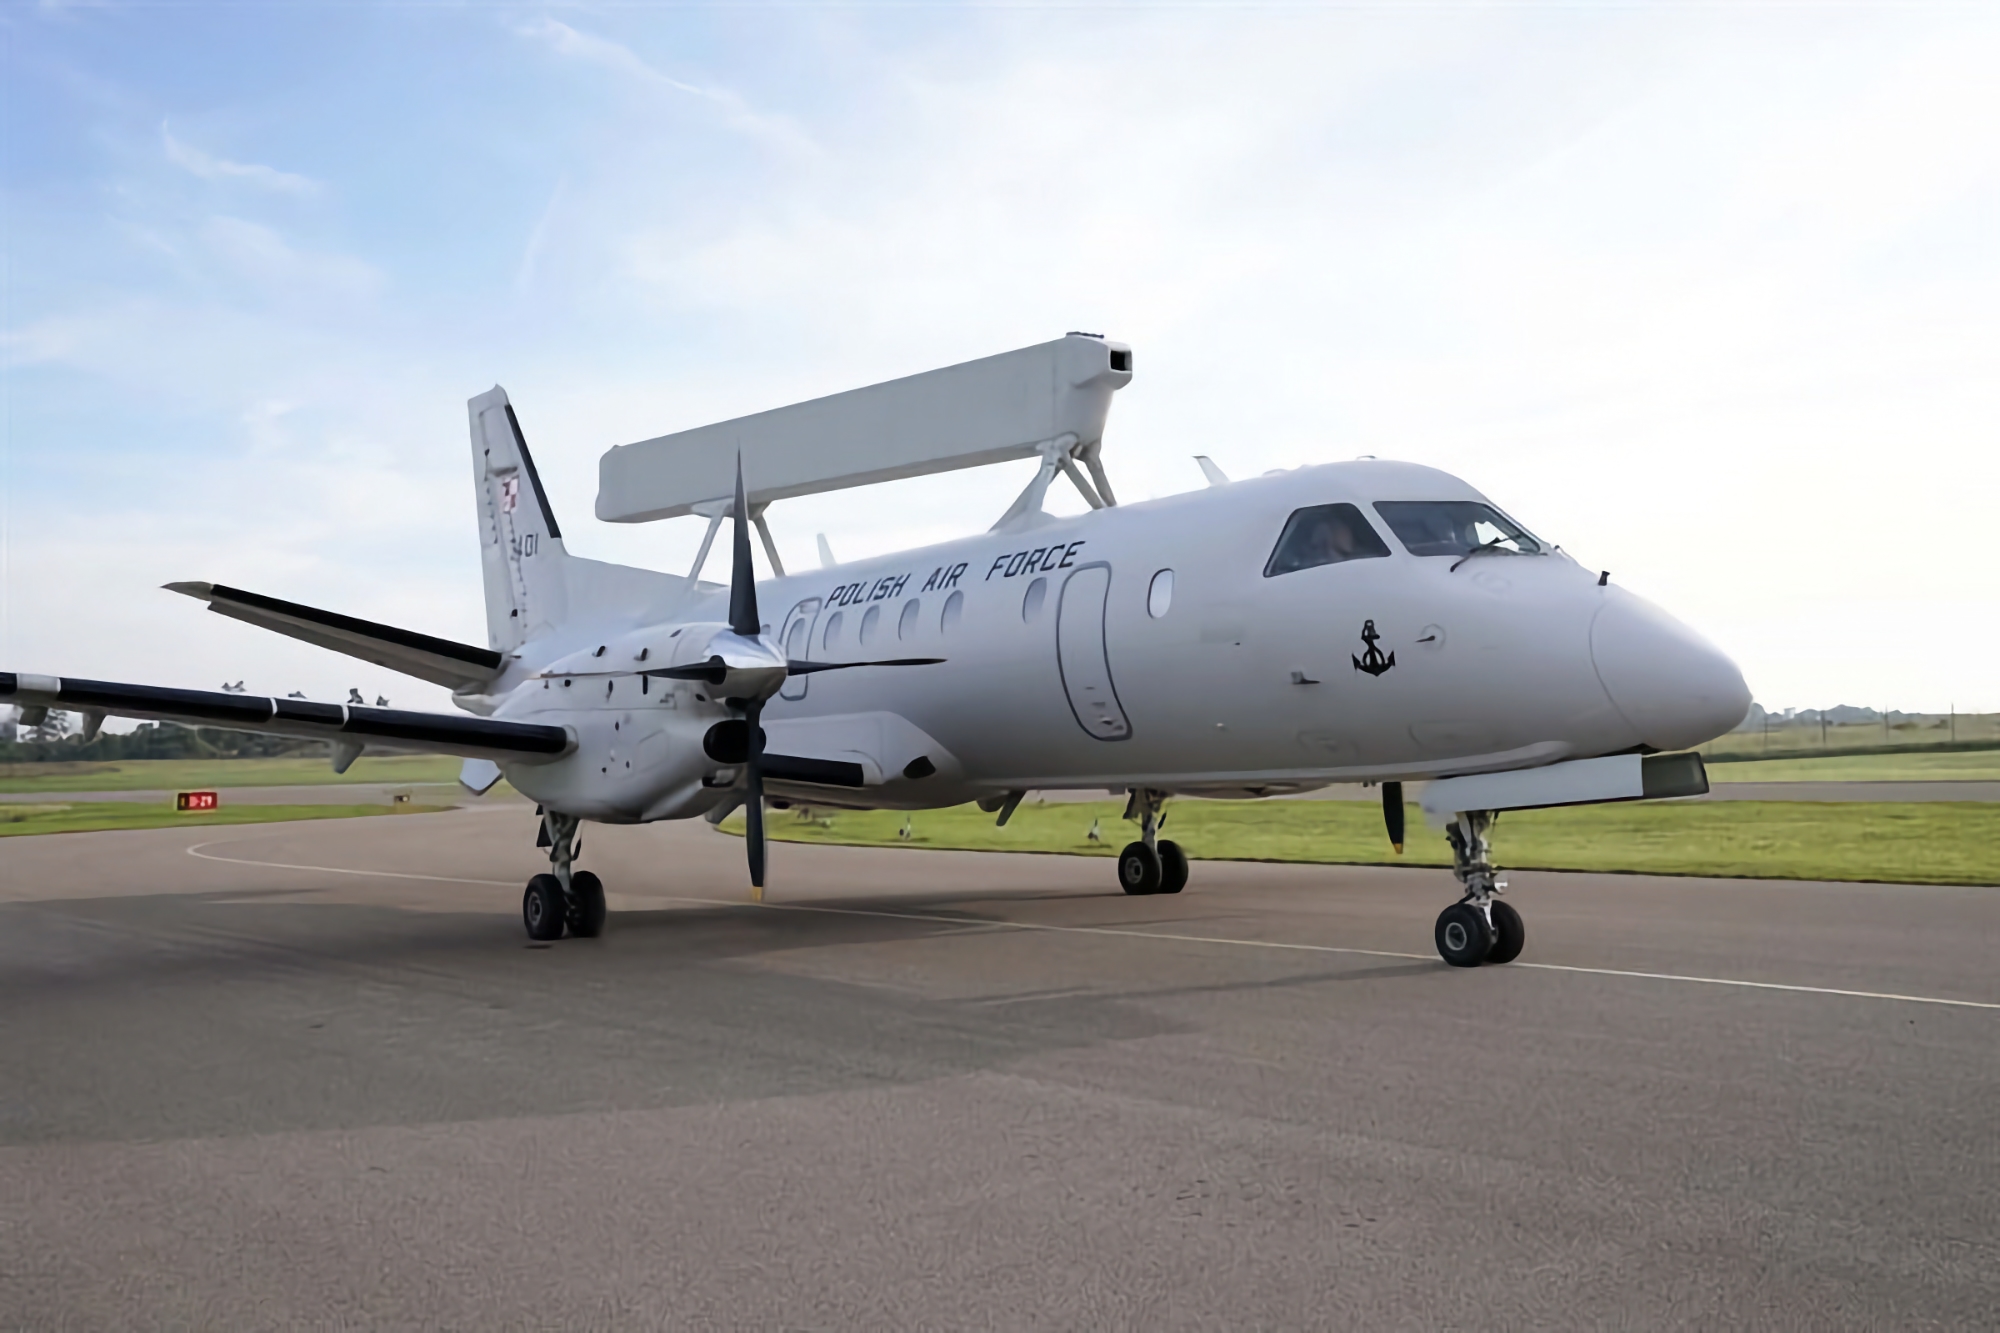 Poland received the first Saab 340B AEW-300 long-range radar detection and control aircraft